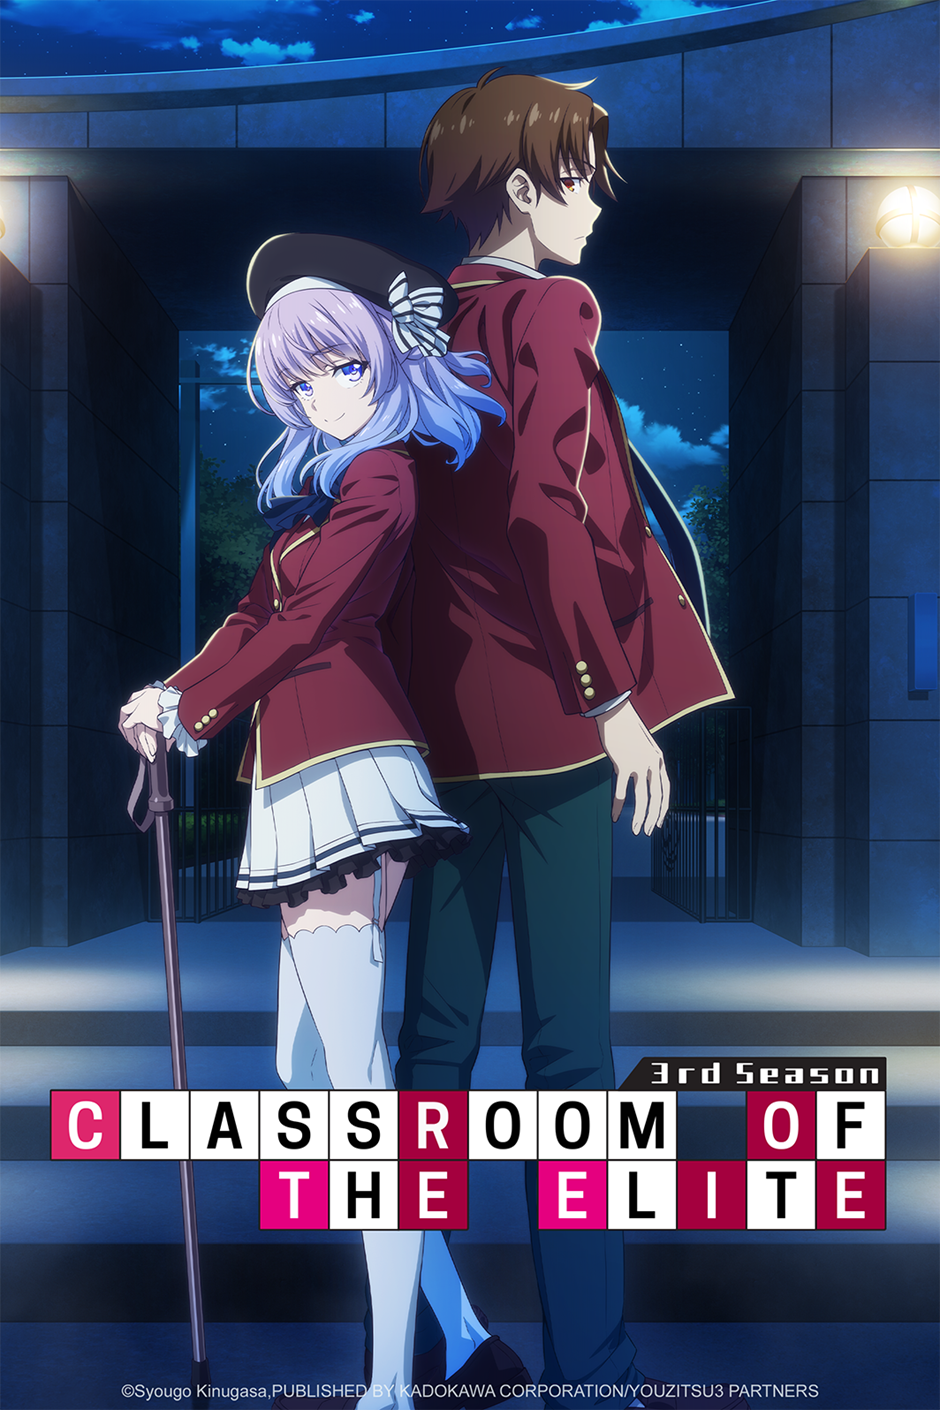 Classroom of the Elite season 3: Release date, plot, cast, and more